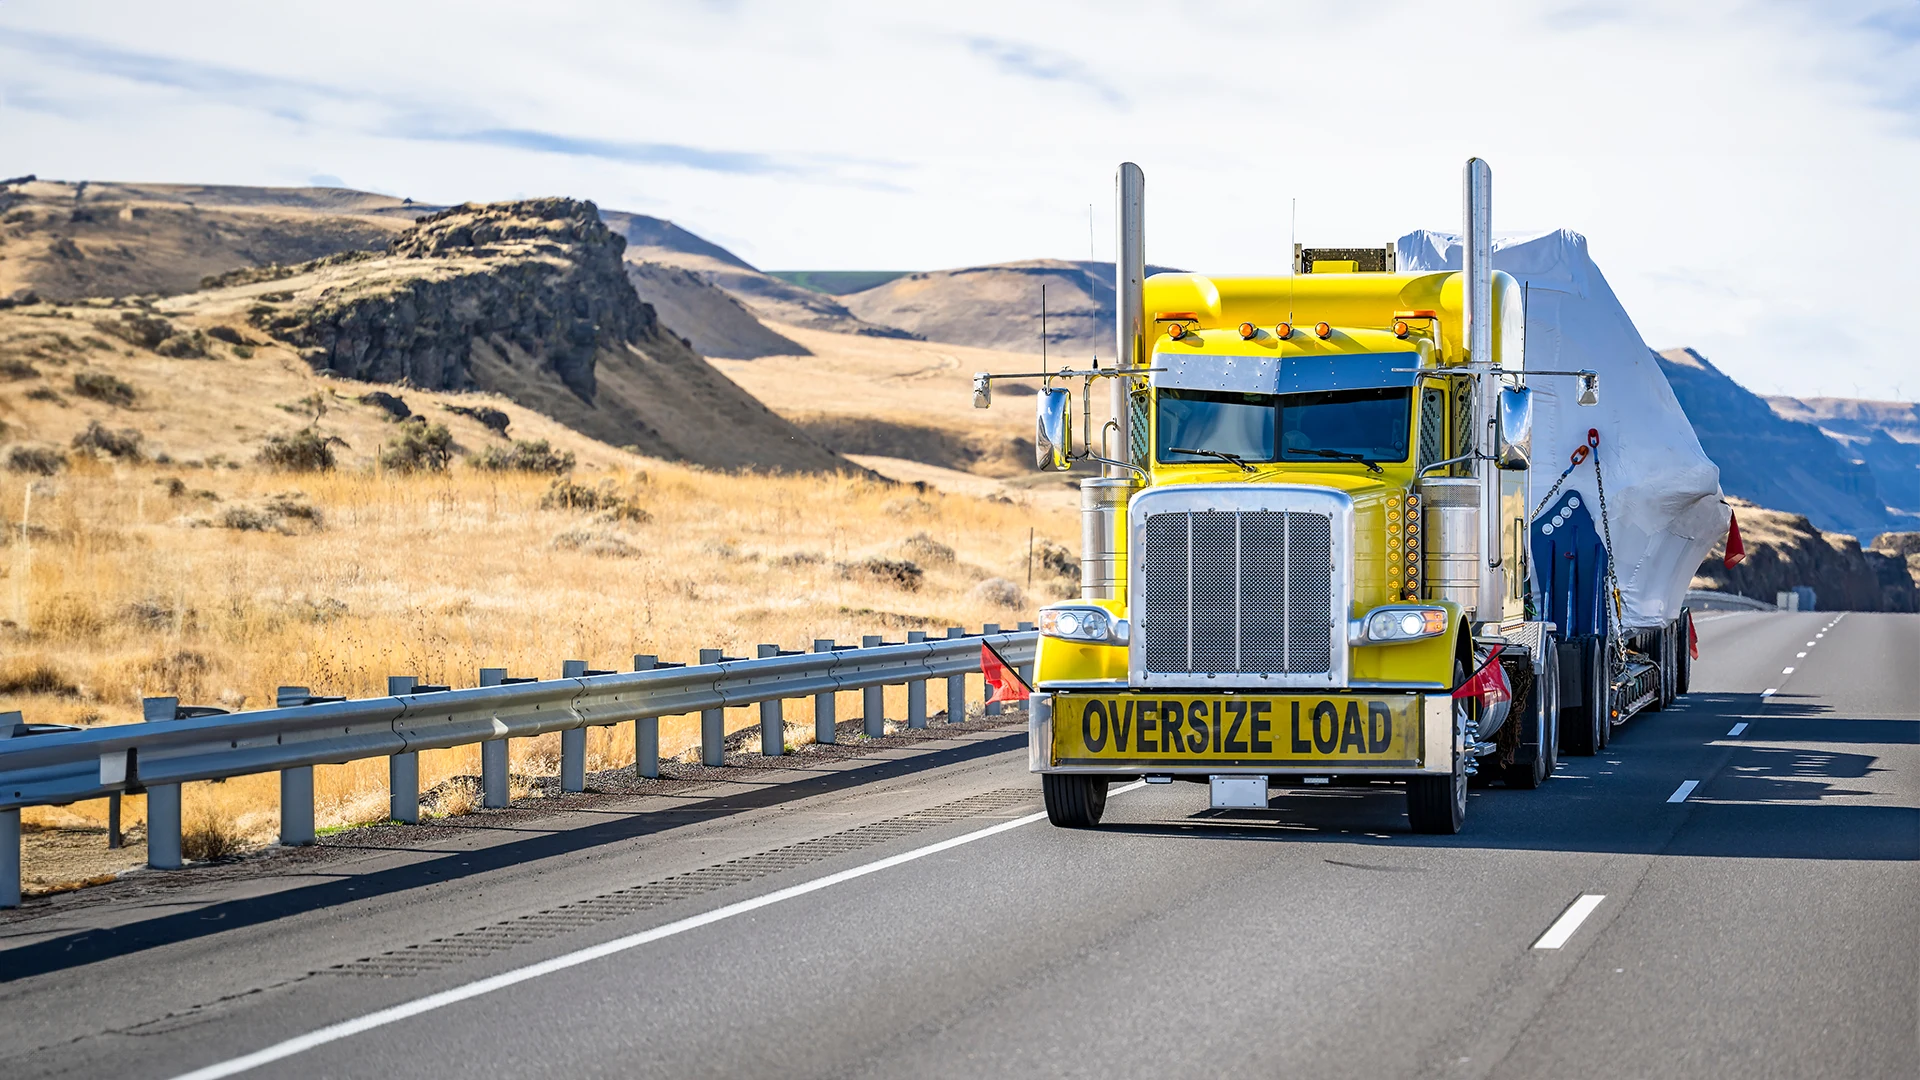 Yellow truck with "OVERSIZE LOAD" banner on a desert highway.